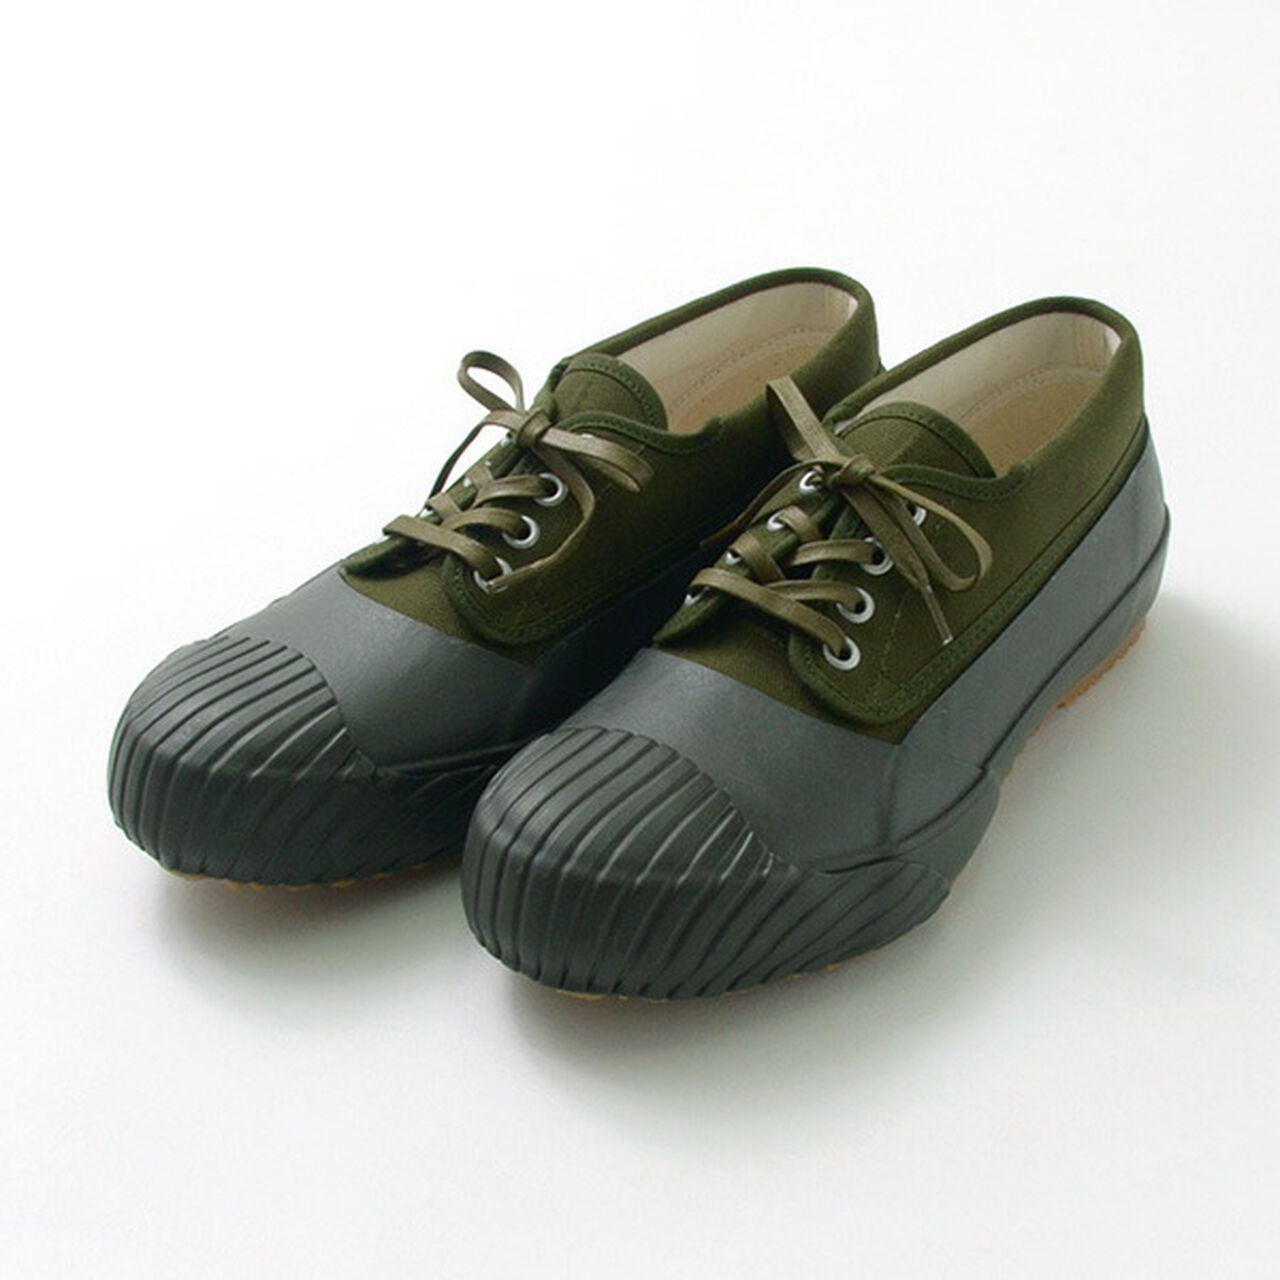 MUD GUARD Sneakers,Olive, large image number 0